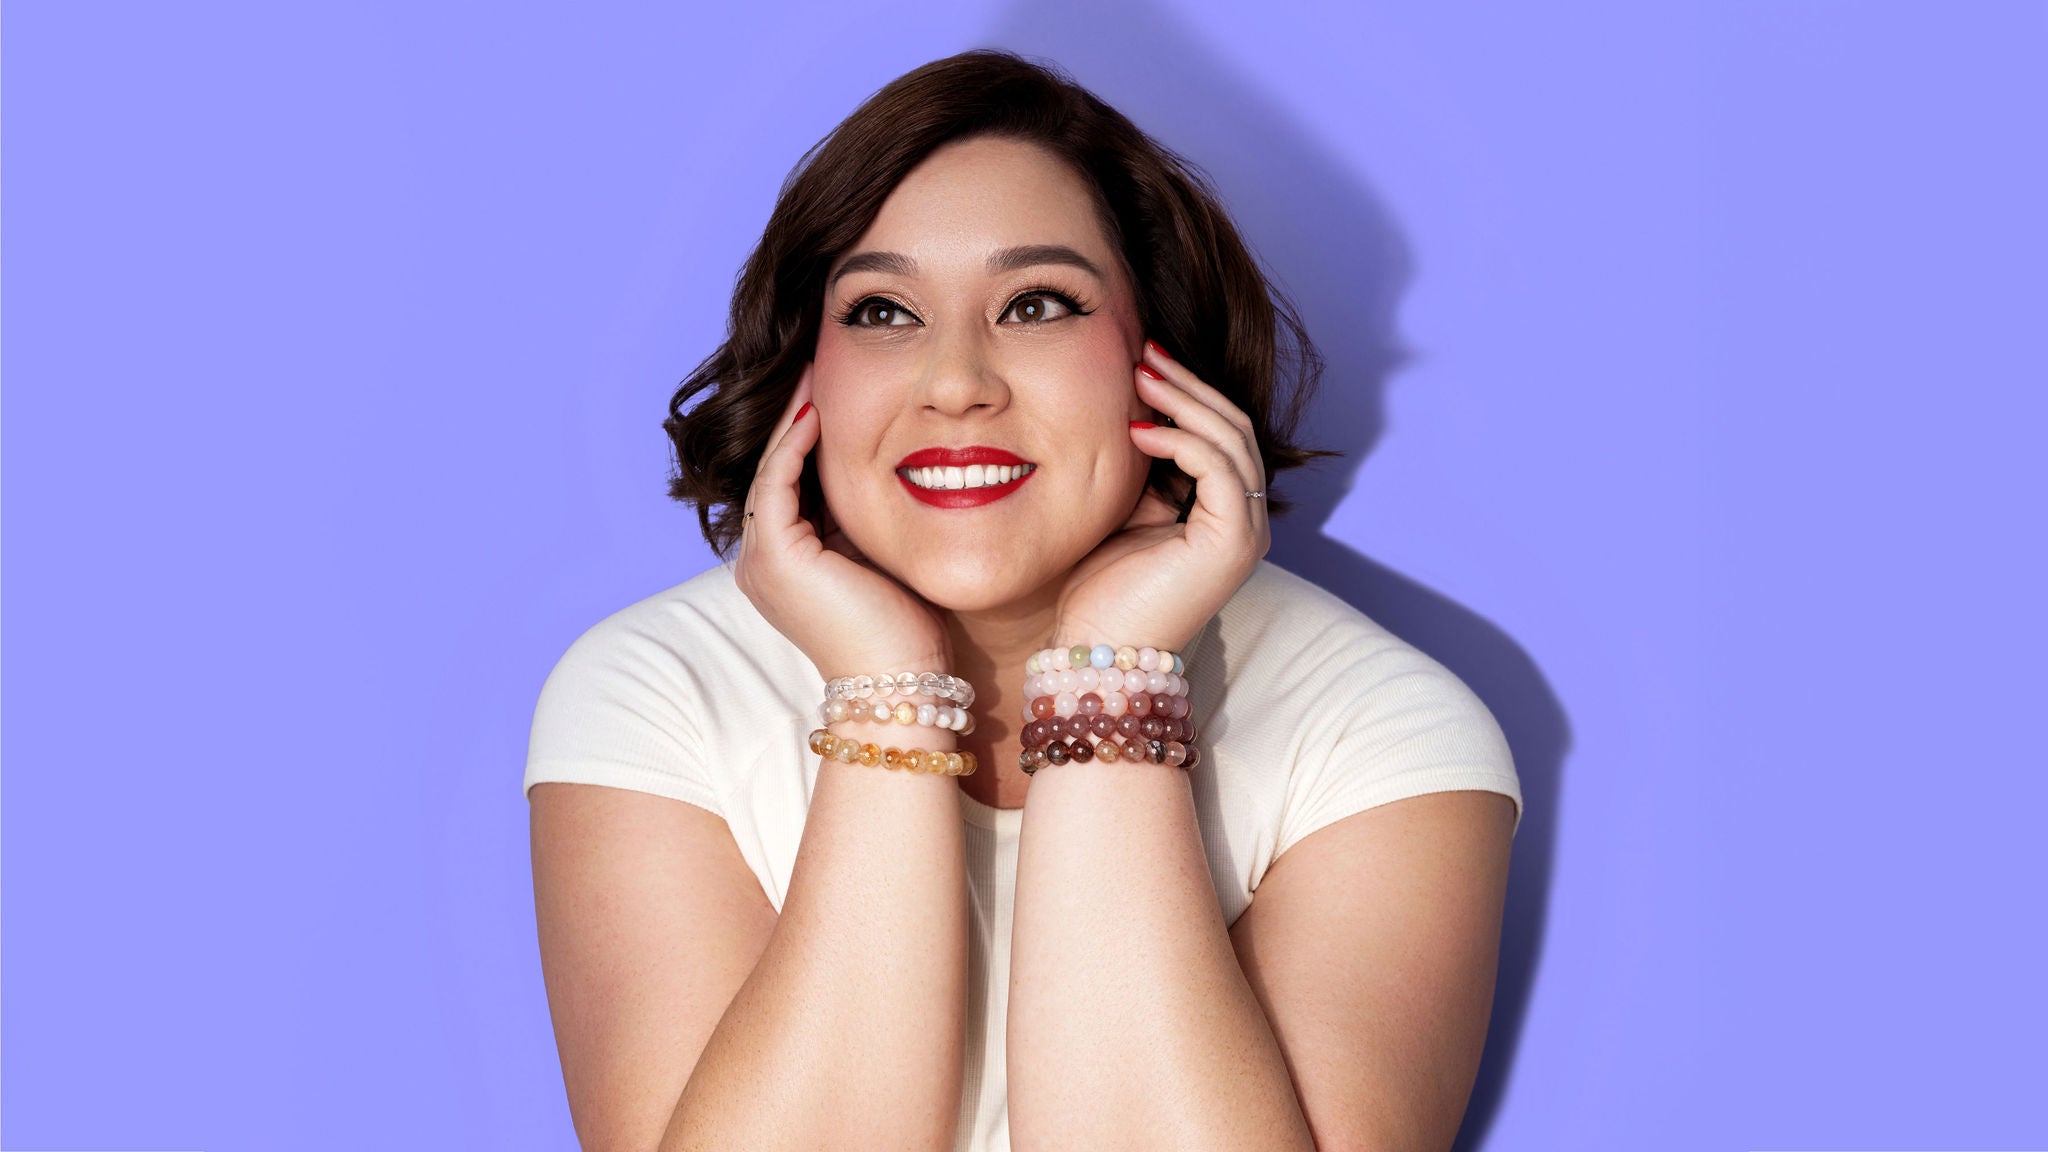 A woman, smiling in bright red lipstick, cups her face with her hands. The background is bright periwinkle. She wears a cream coloured tshirt and on each wrist are numerous crystal gemstone bracelets in a variety of yellow, pink, red, and pastel colours.